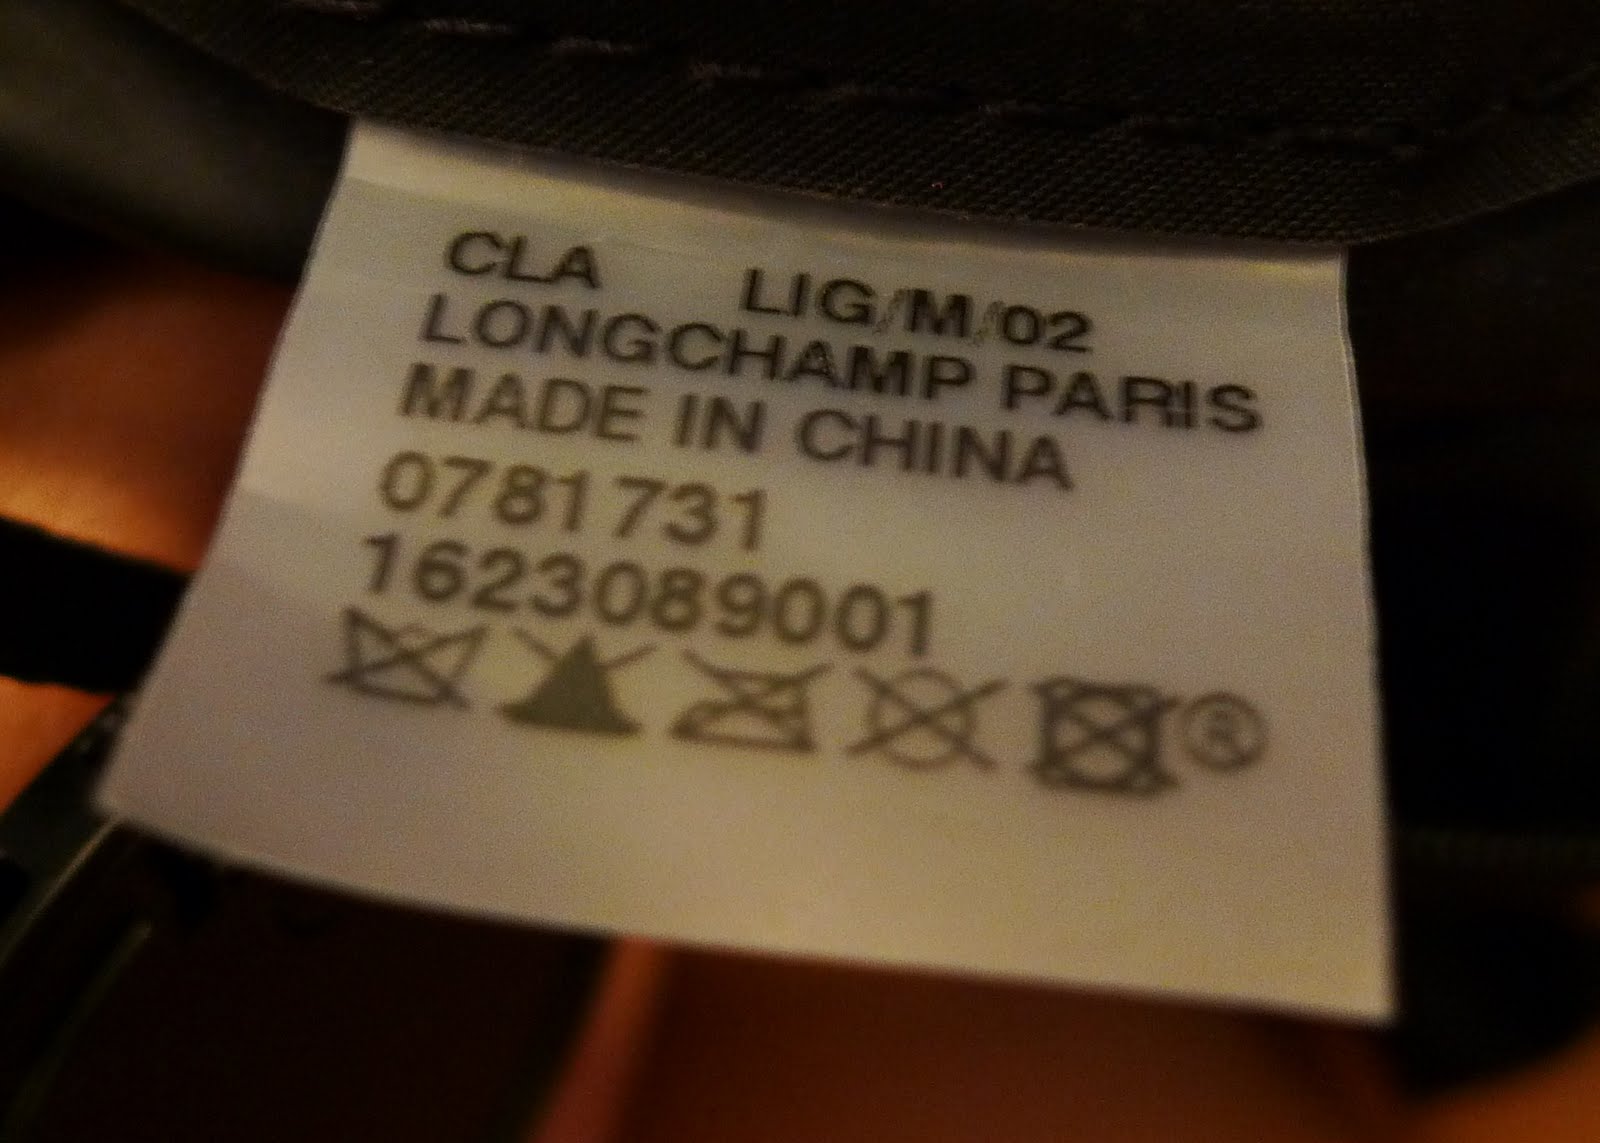 ON FRENCH AND CHINESE LE PLIAGES+AUTHENTICATE YOUR LE PLIAGE